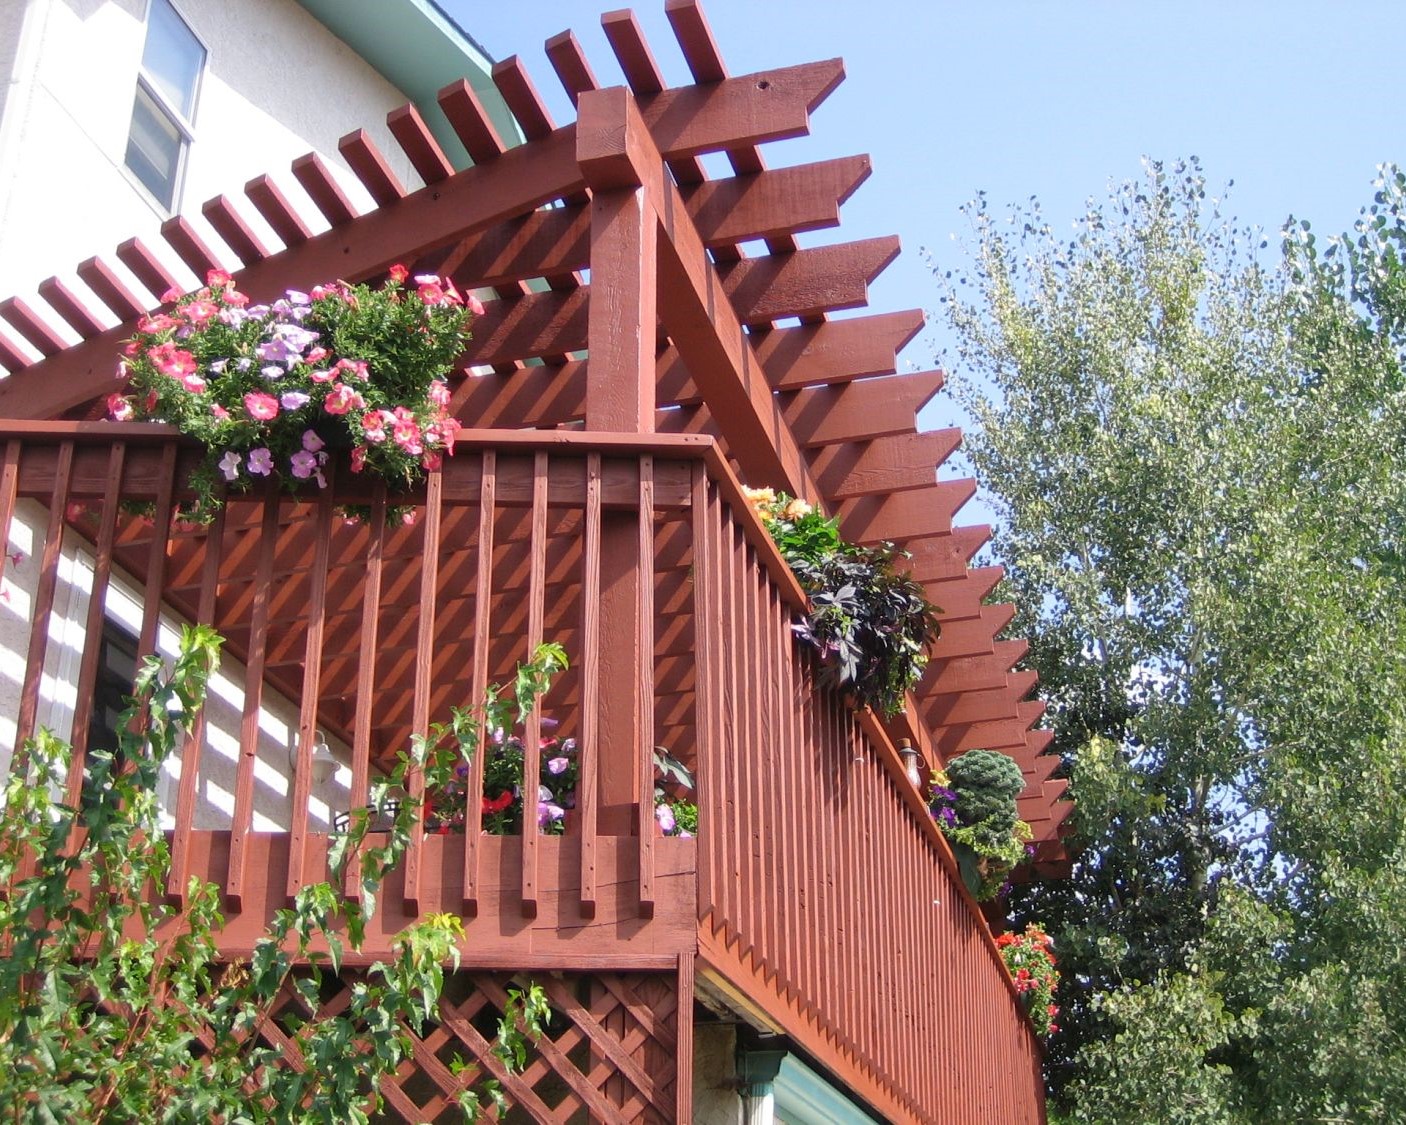 Redwood deck with picket fence railing and pergola that have been stained to match each other